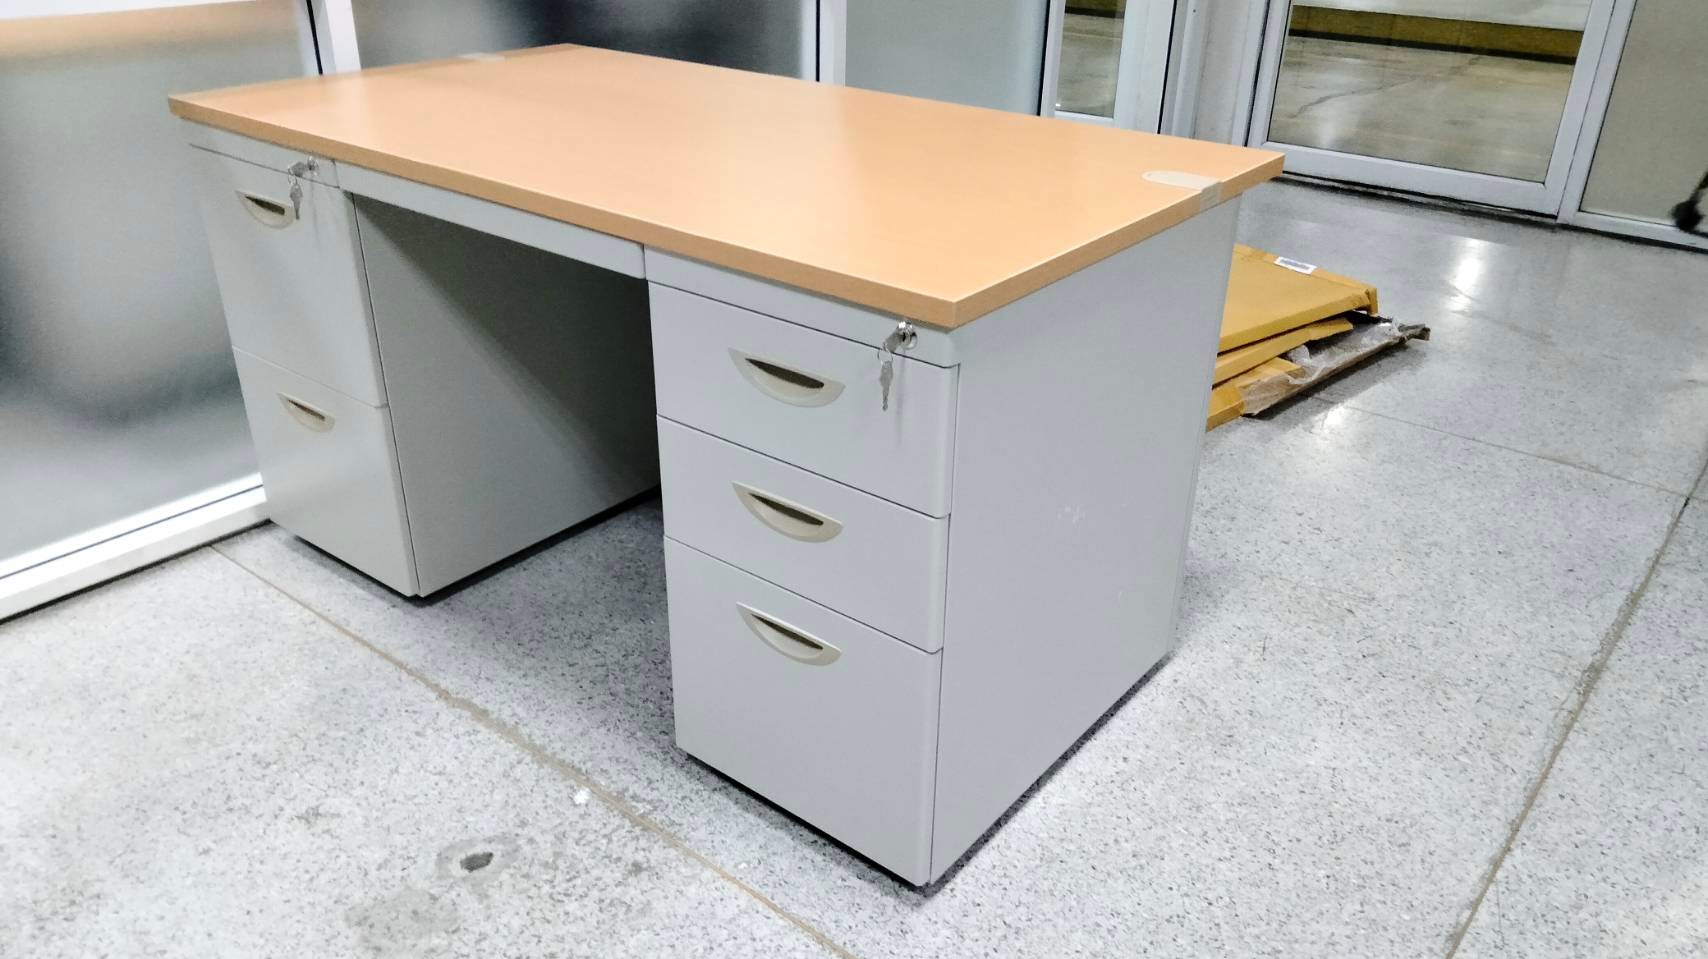 49046::D23-75140-60-90180::A Lucky metal table with 2 drawers on left, 3  drawers on right and melamine laminated sheet on top surface. Available in 3 sizes. LUCKY Steel Tables